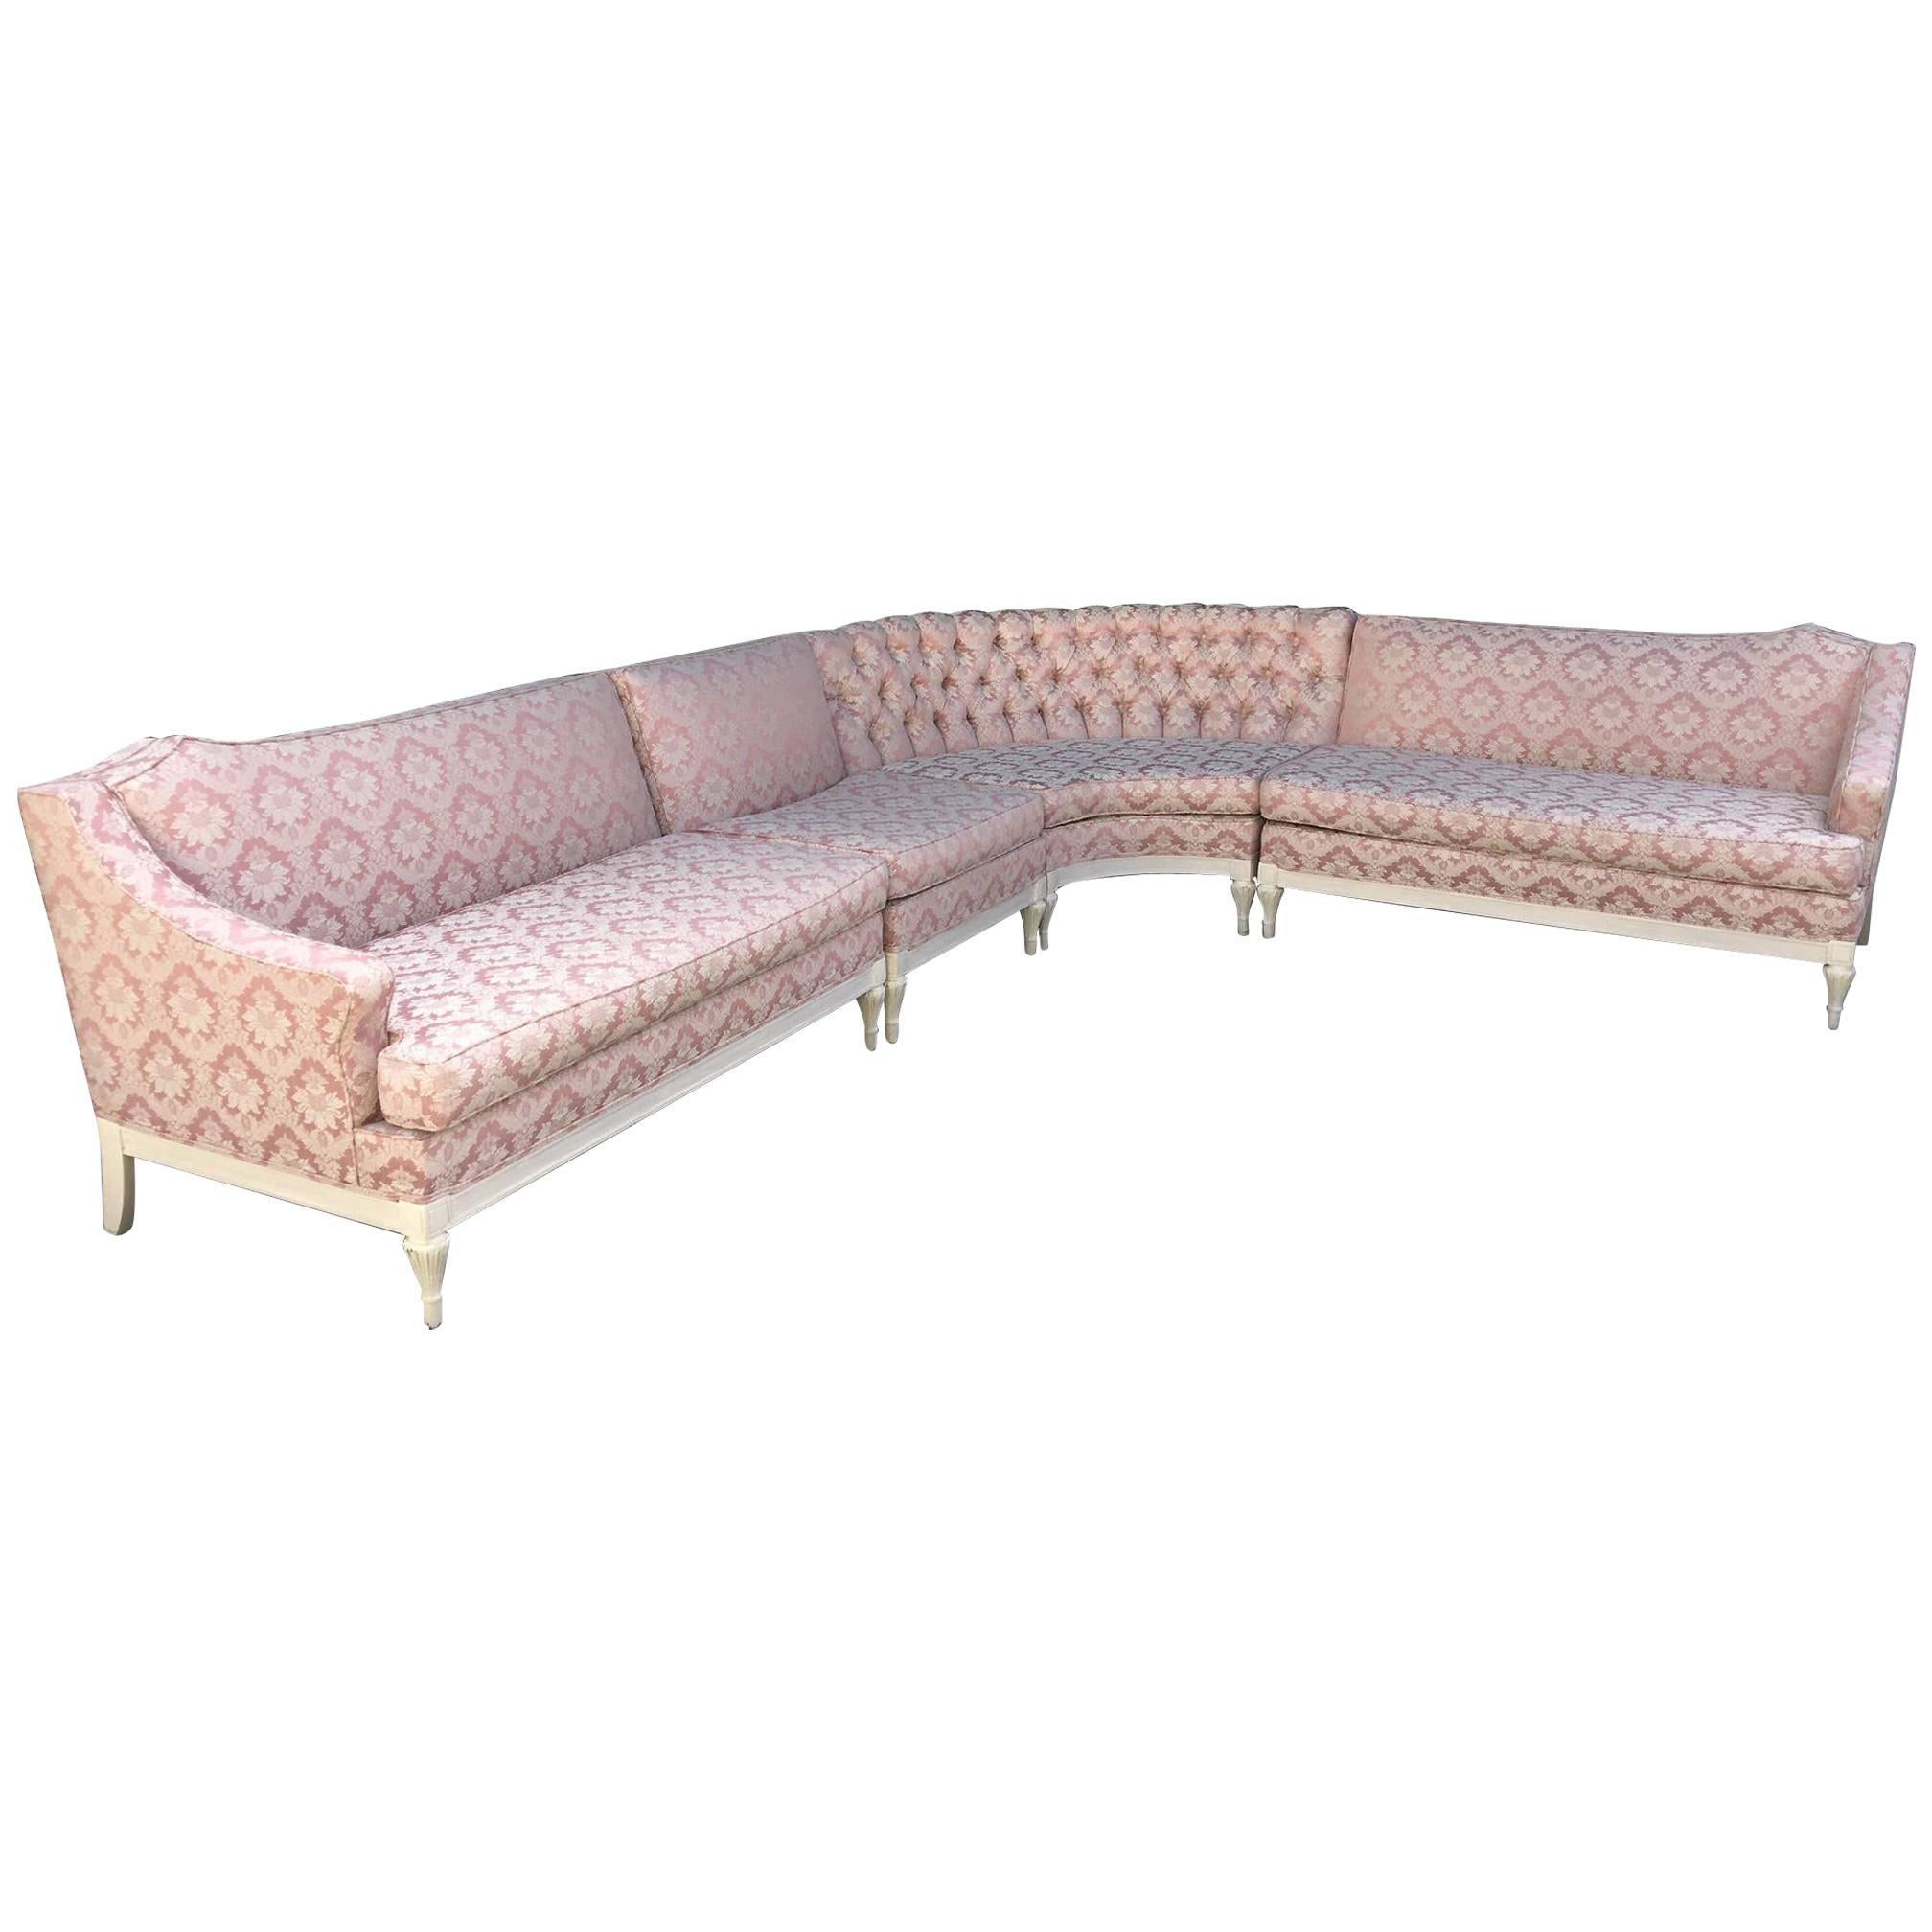 Four Piece Hollywood Regency Pink Damask Tufted Sectional Sofa